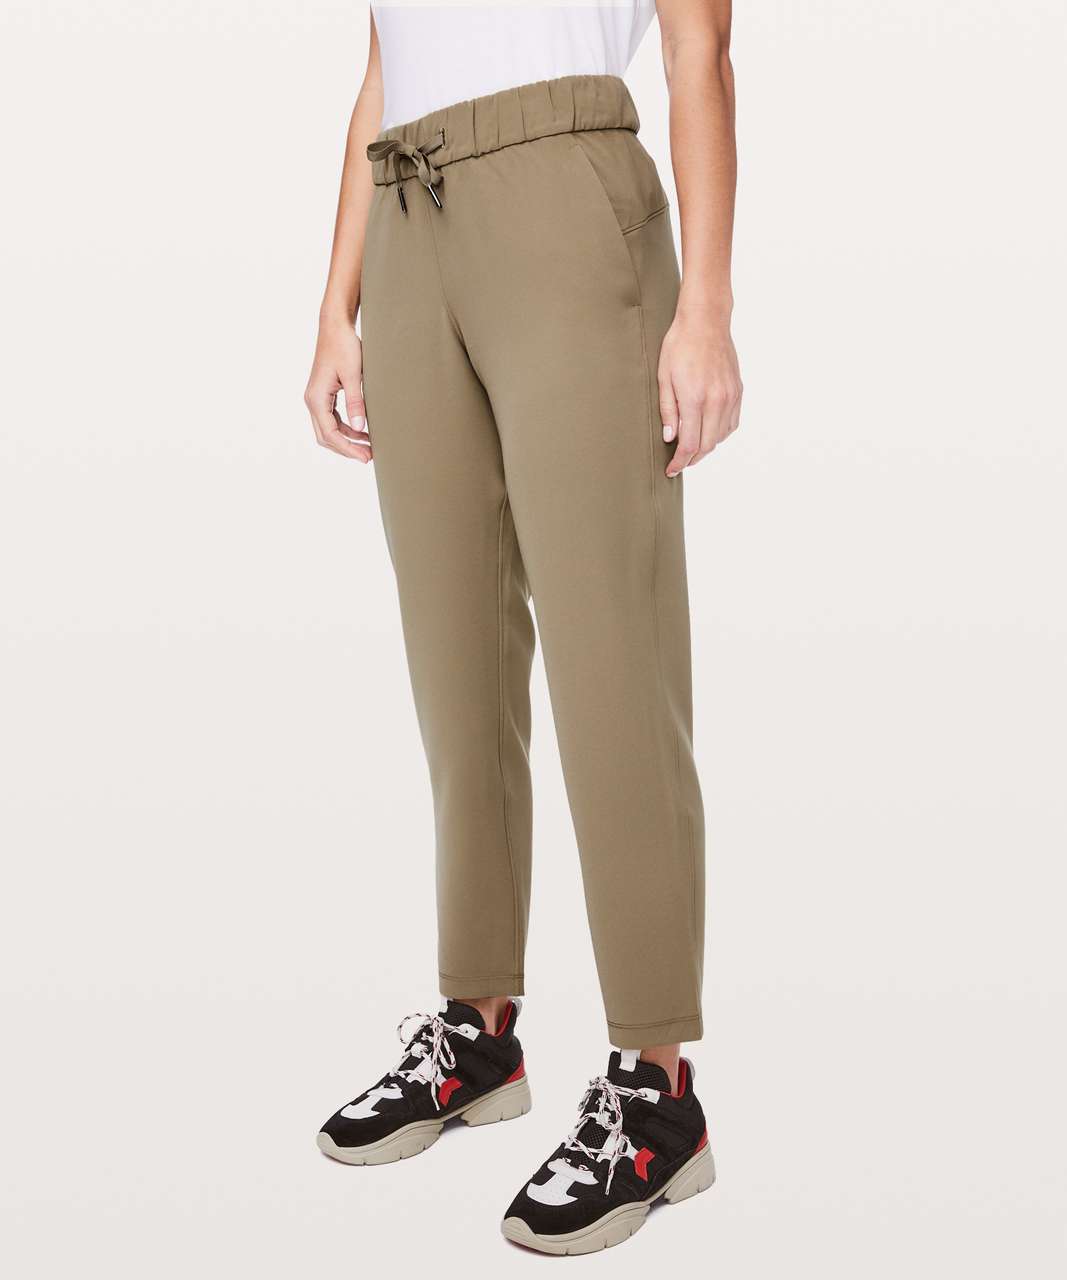 Lululemon On The Fly Pant *Woven 28" - Frontier